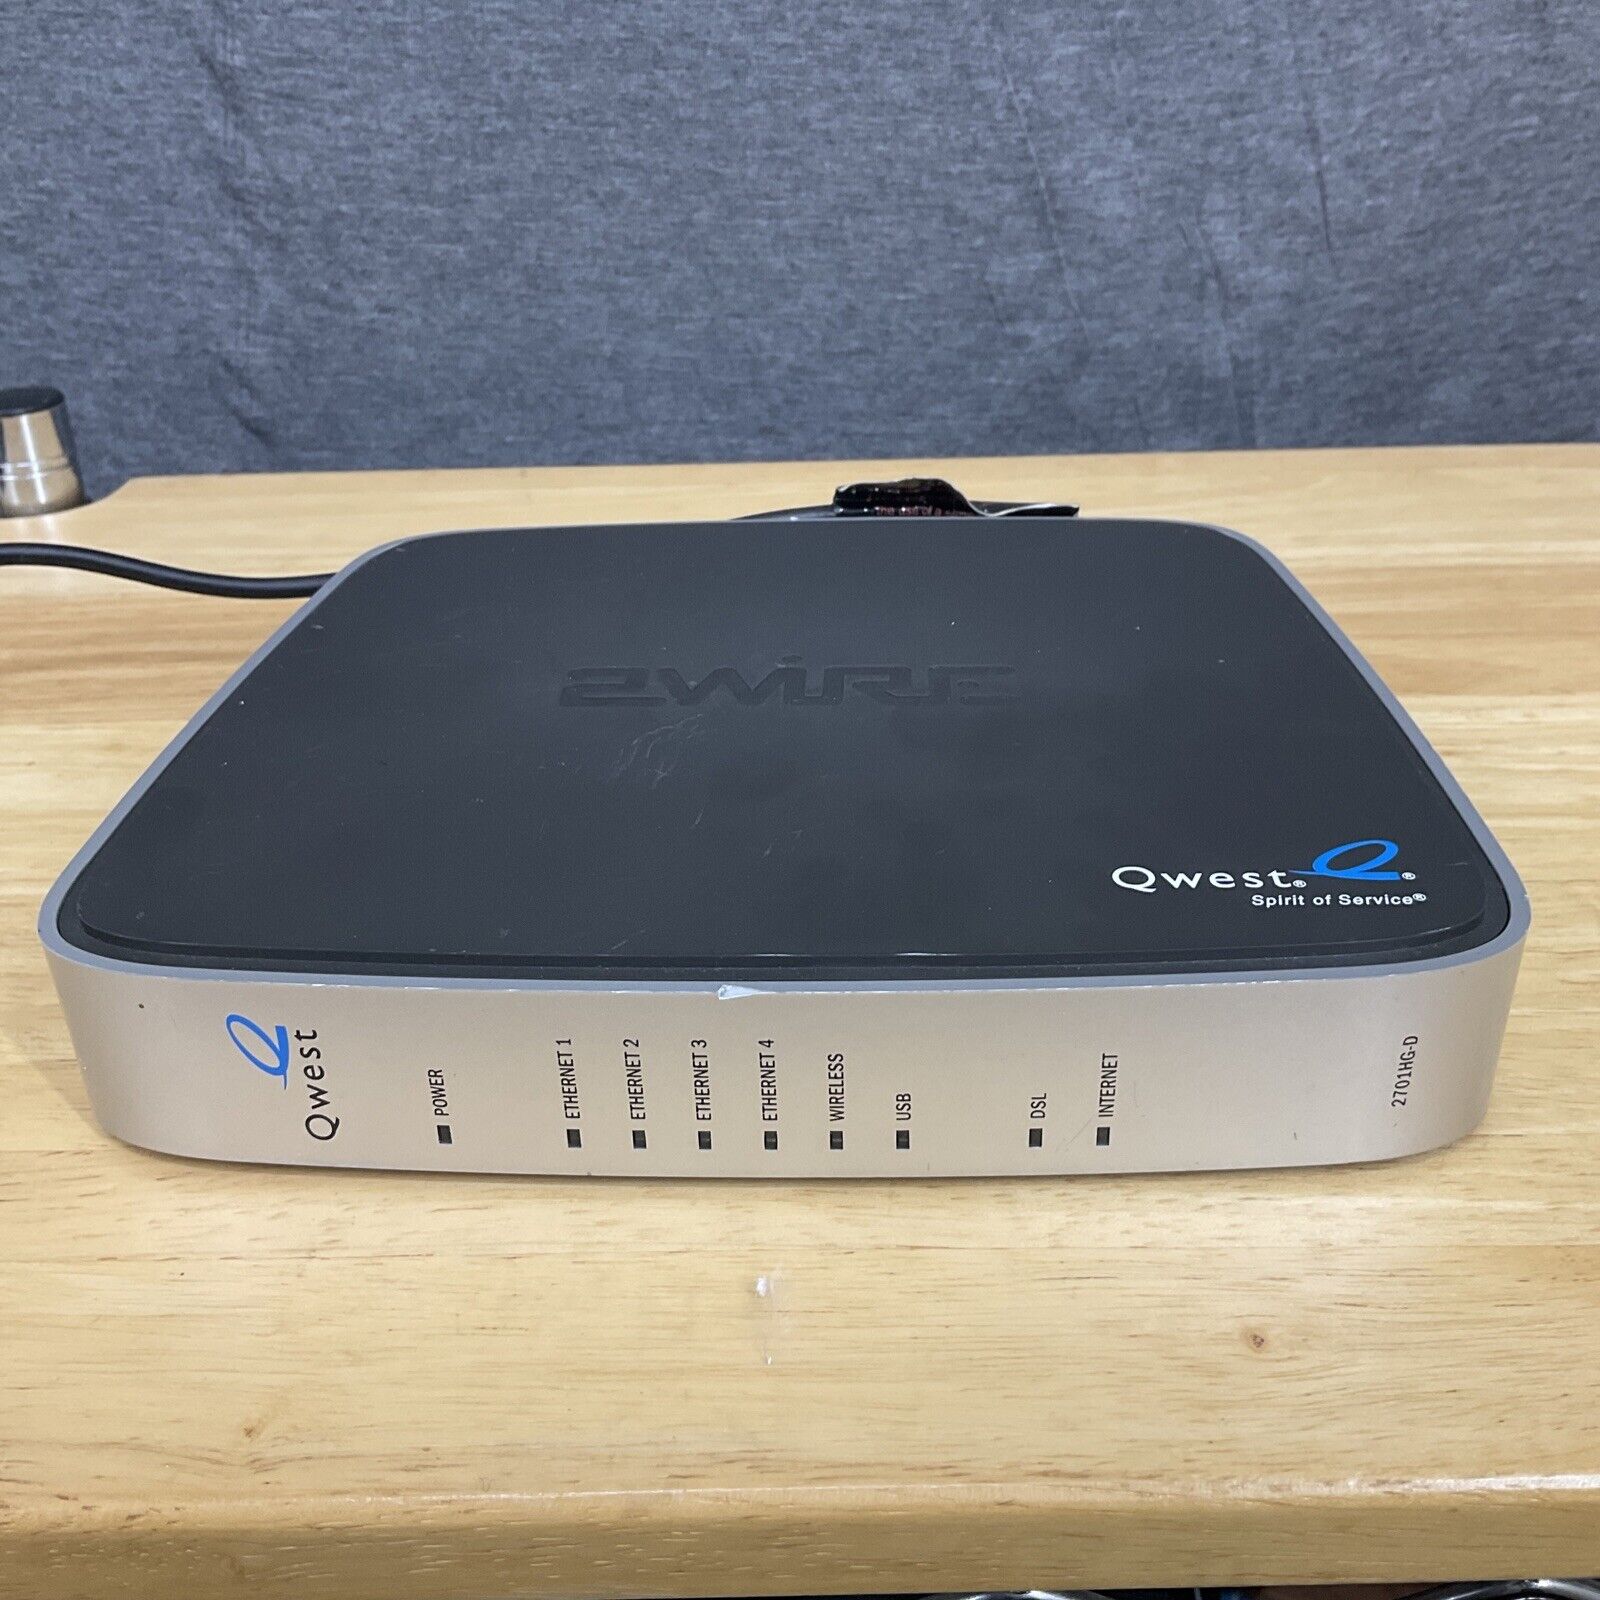 2WIRE MODEM ROUTER - Qwest/Centurylink - 2701HG-D Wi-Fi with Power Supply